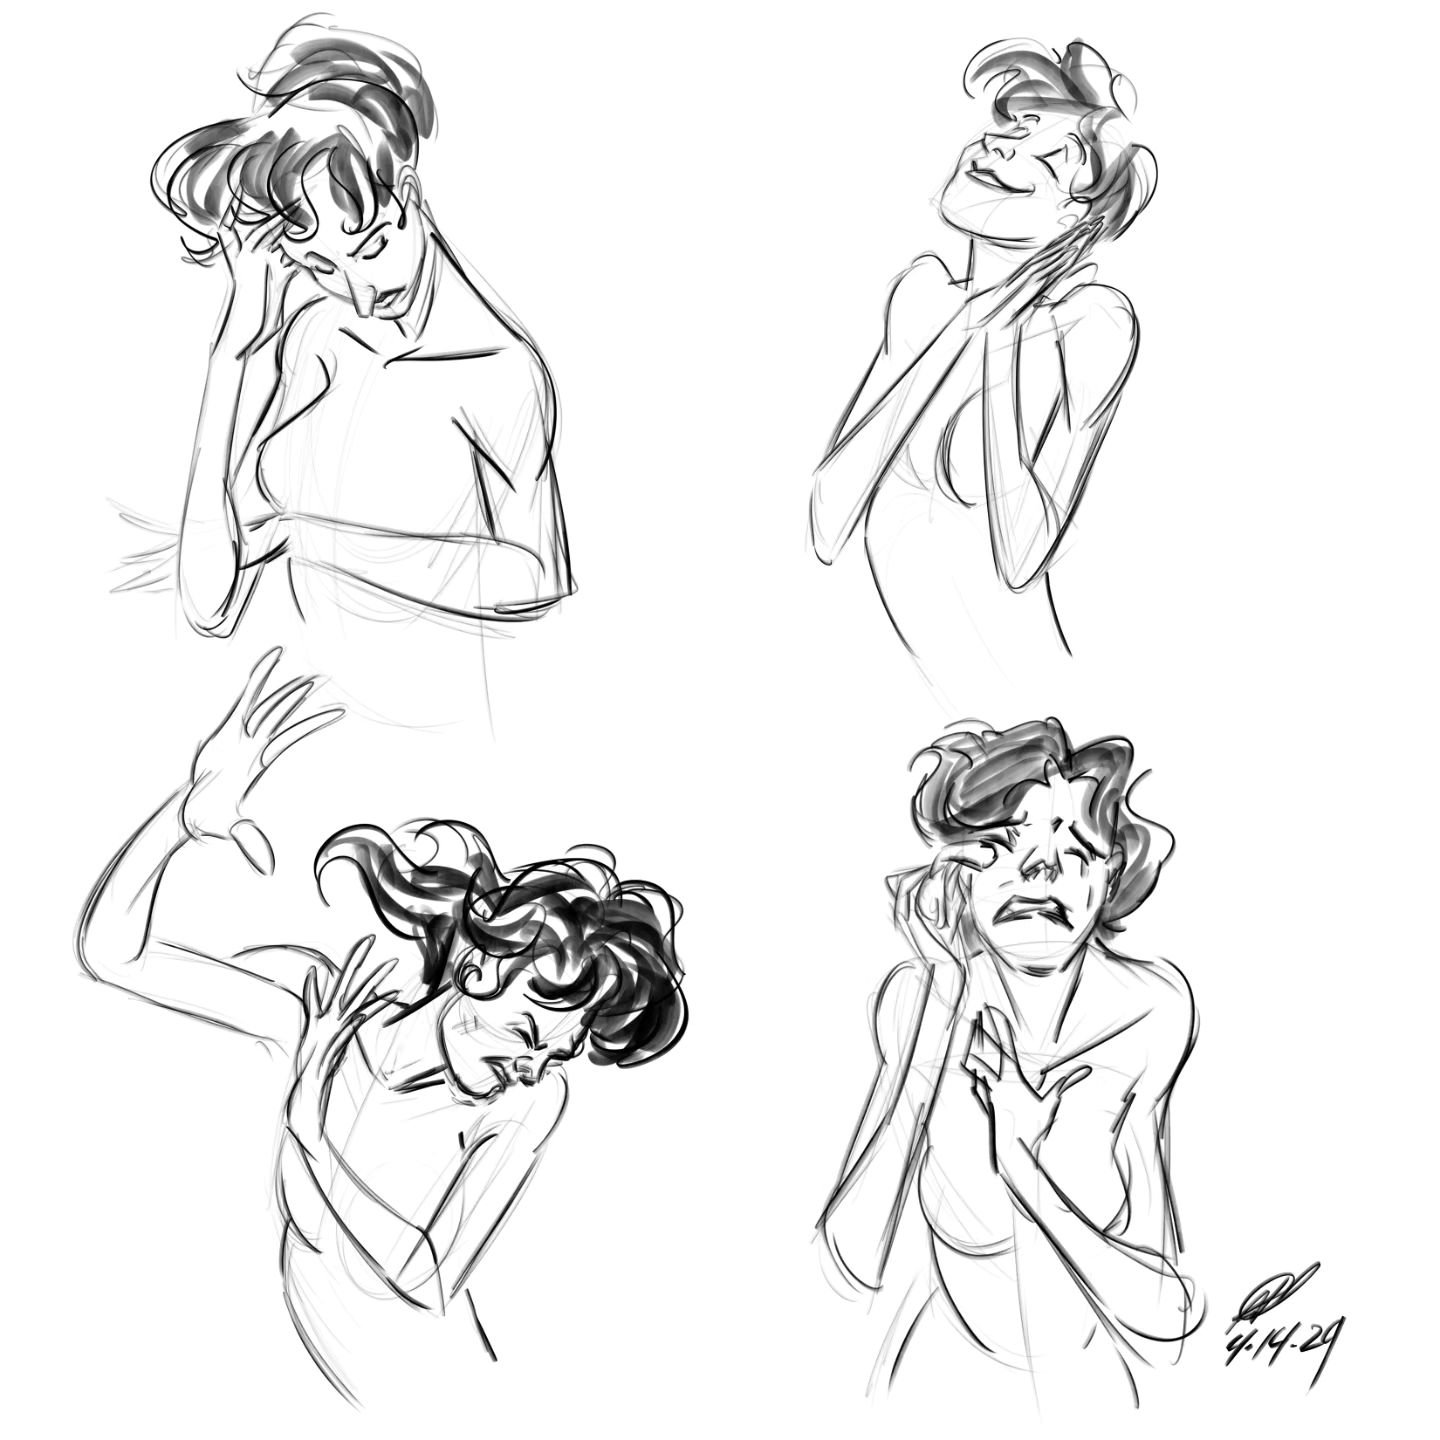 A collection of performance portraits of @ninaexotika posing for @veersdrawings &quot;The Life of Mata Hari&quot; drawing session. Nina put a lot of expression in these, which were a joy to draw as I began to drop more details and get into the story 